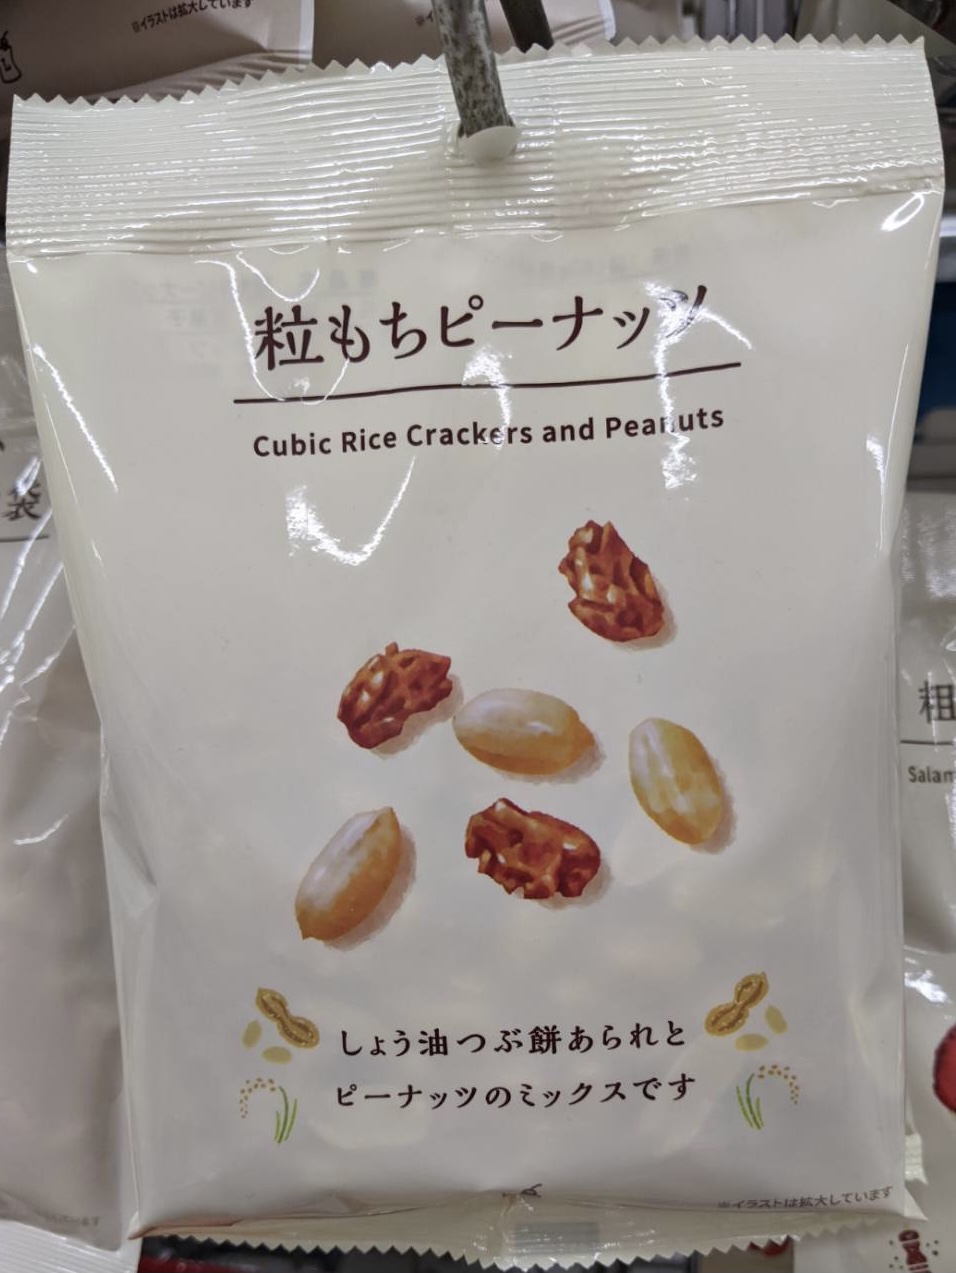 Lawson Cubic Rice Crackers and Peanuts